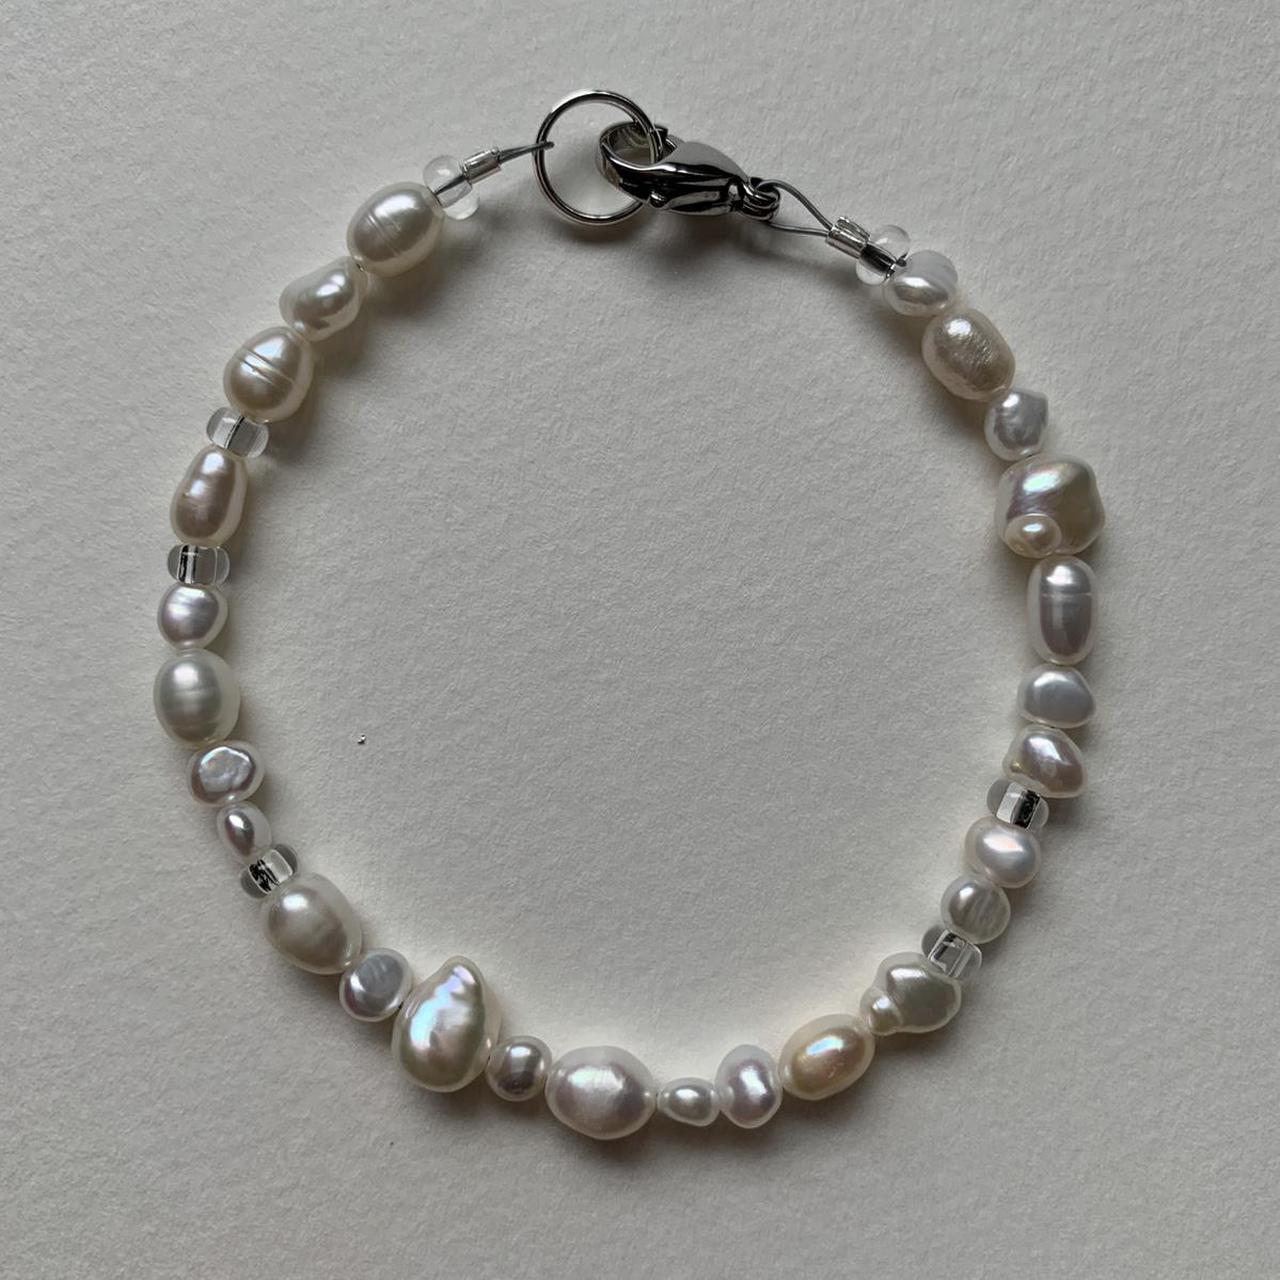 7” Pearl bracelet. Made with fresh water pearls and... - Depop